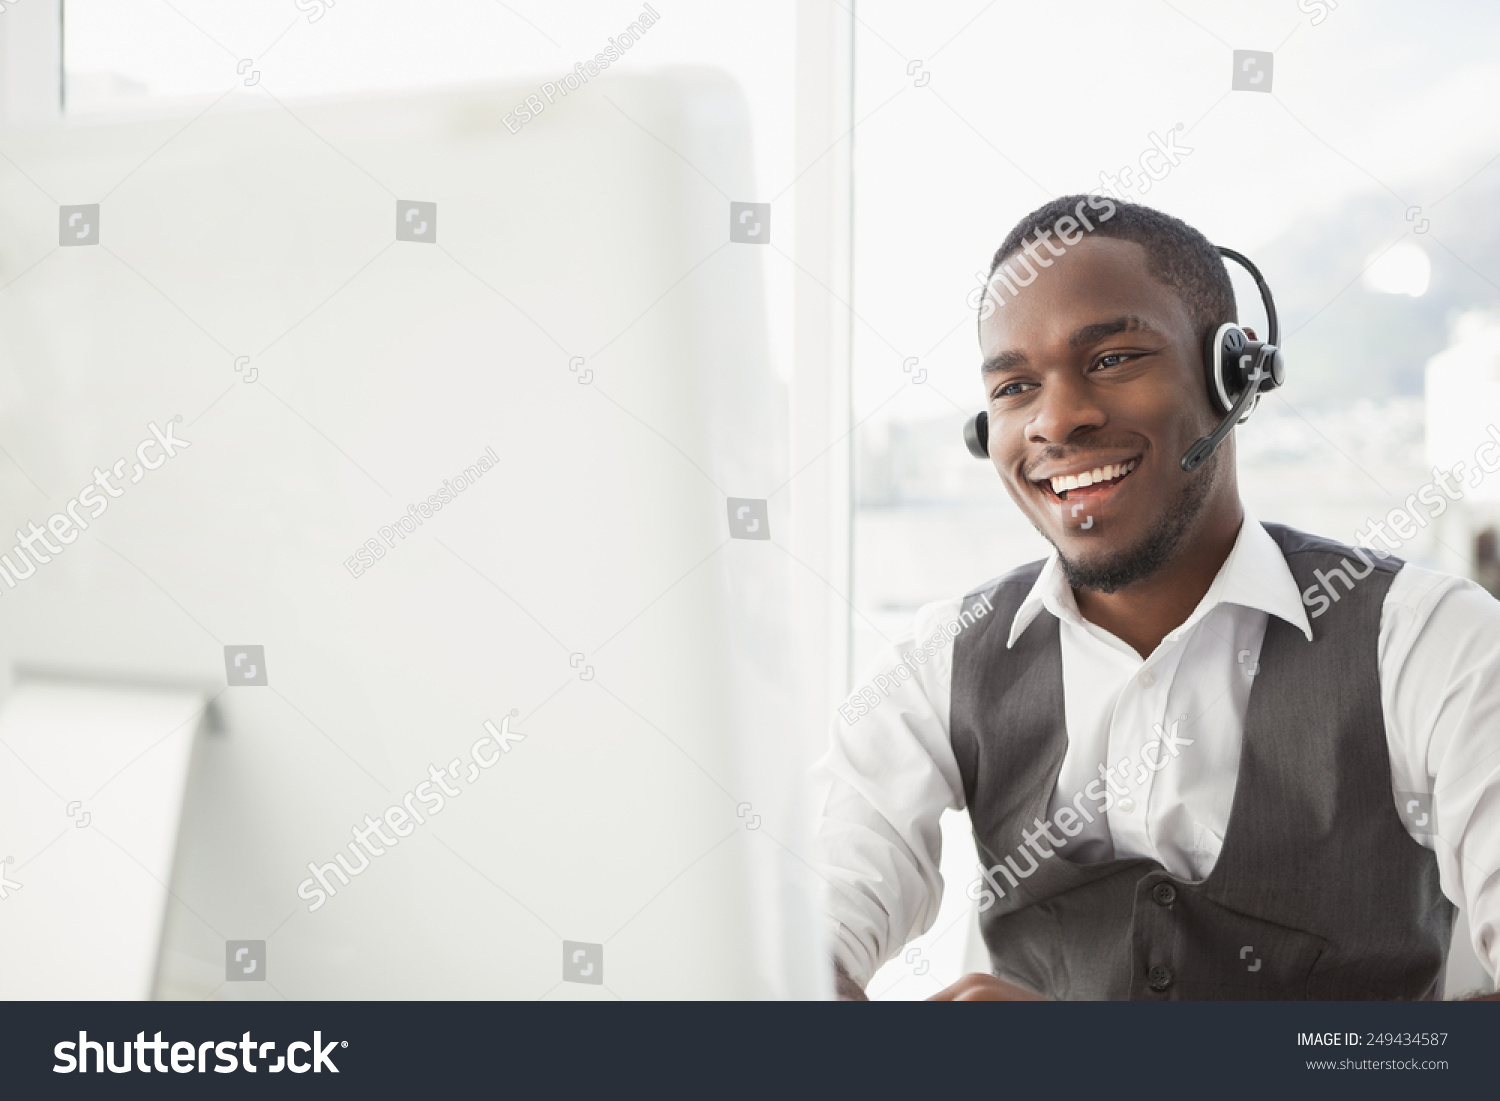 Smiling businessman with headset interacting in his office #249434587